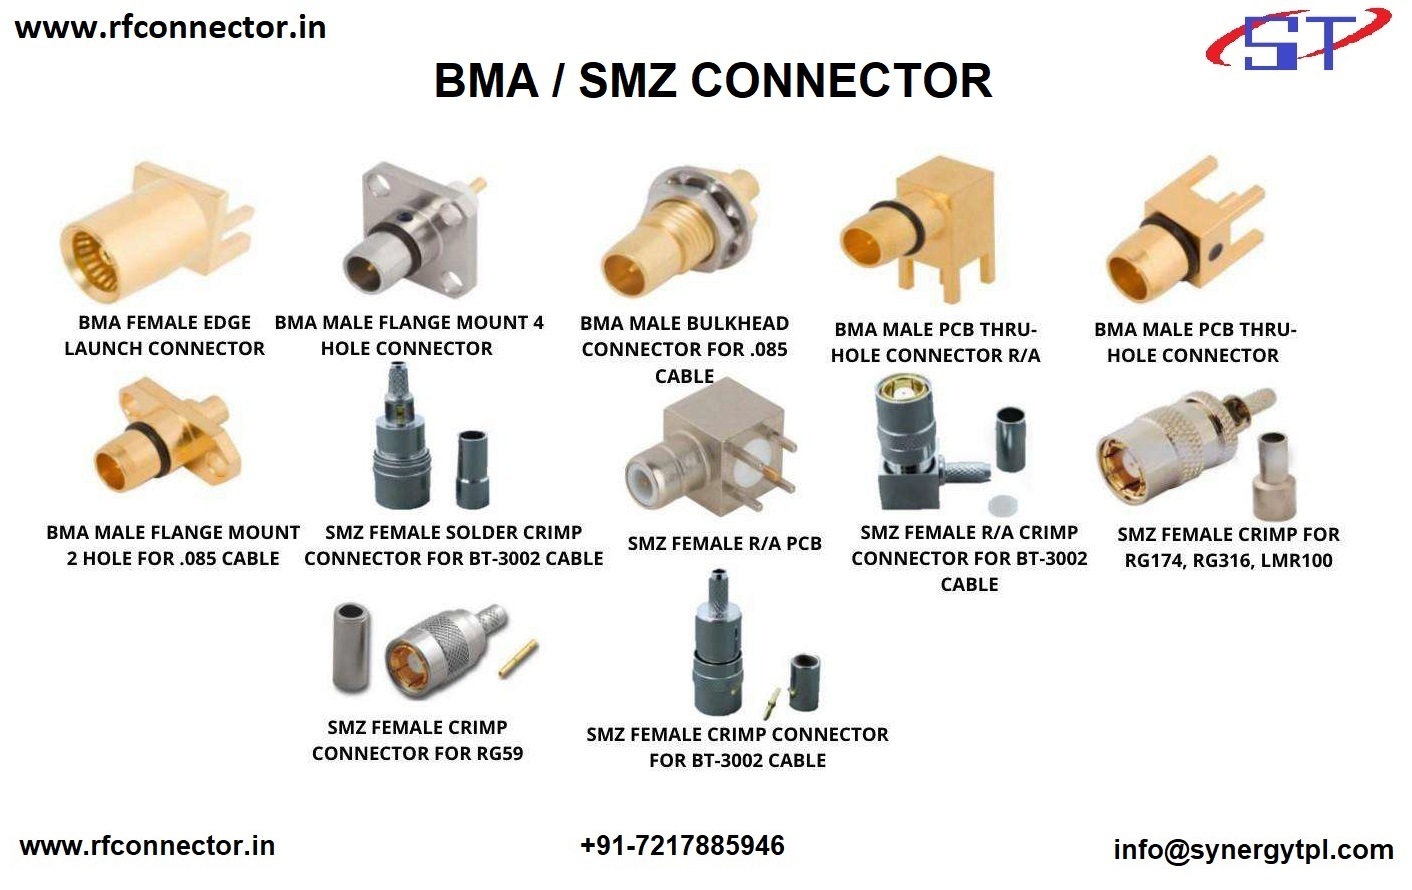 SMA female crimp connector for LMR 100 cable